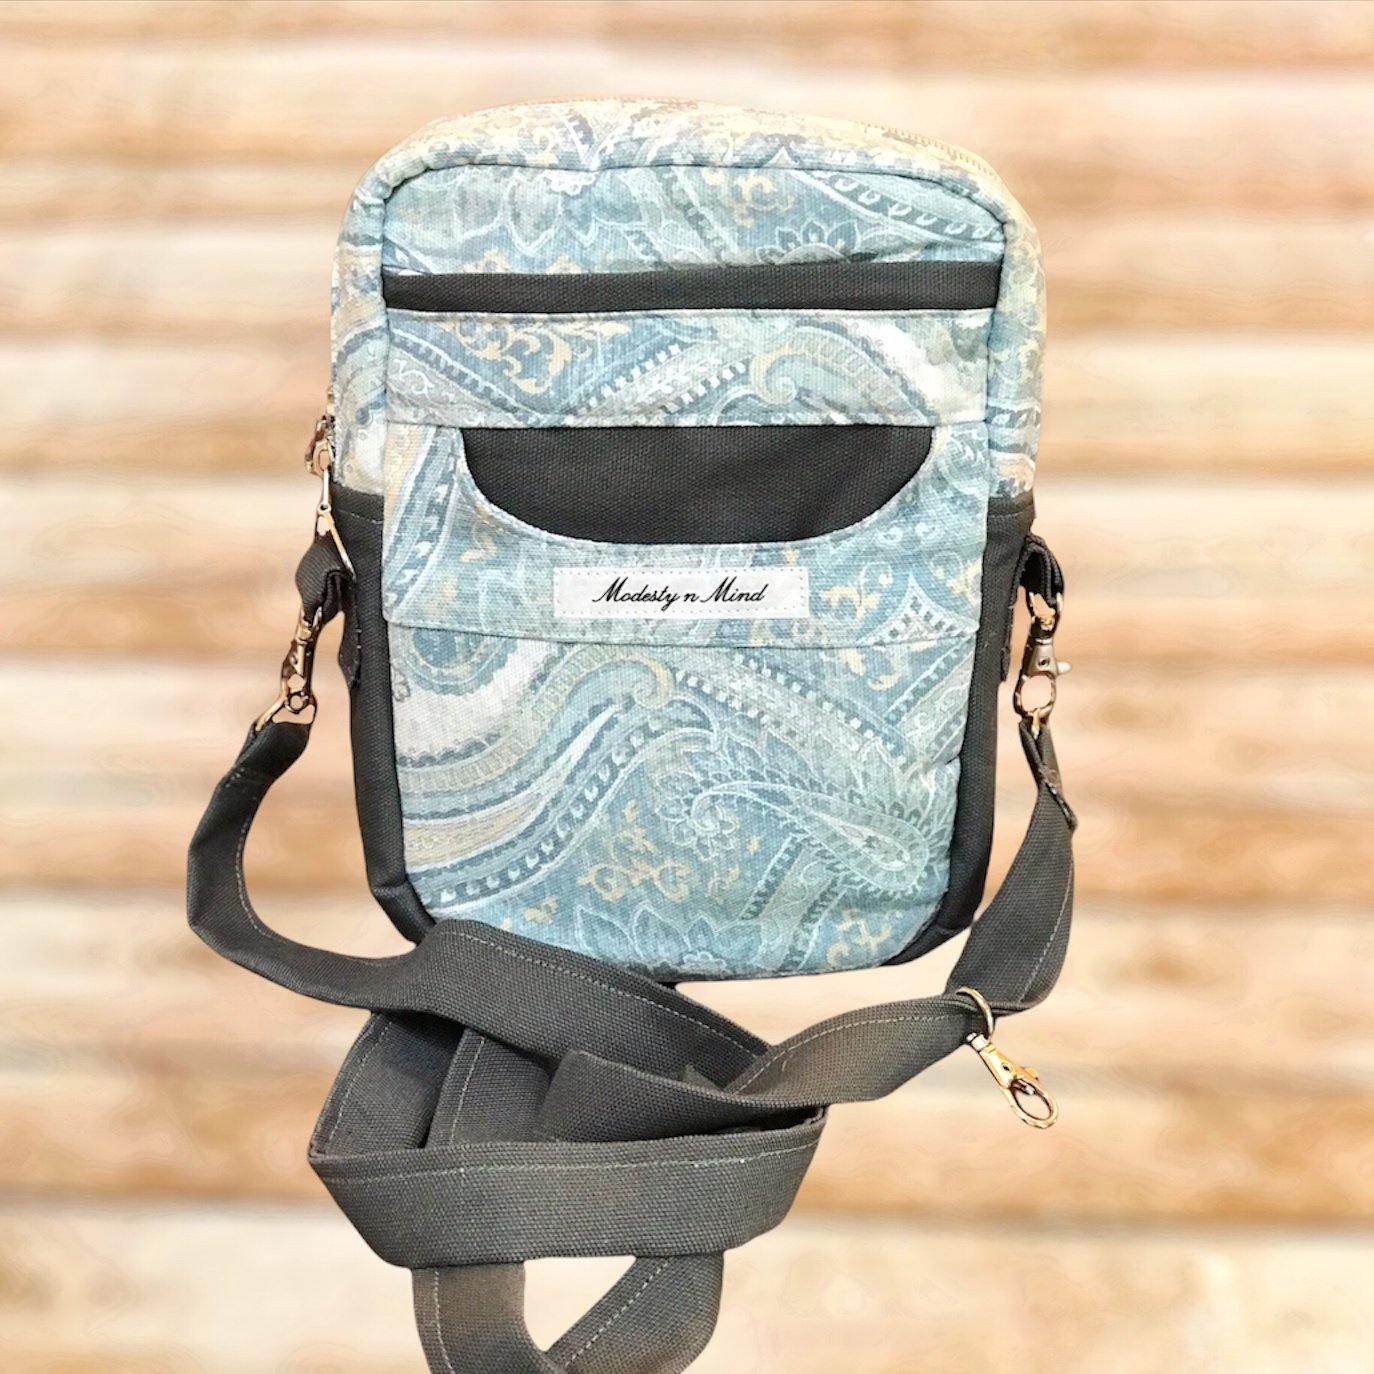 Teal & Gray Simple Crossbody-Modesty n Mind-Purses,Ready to Ship